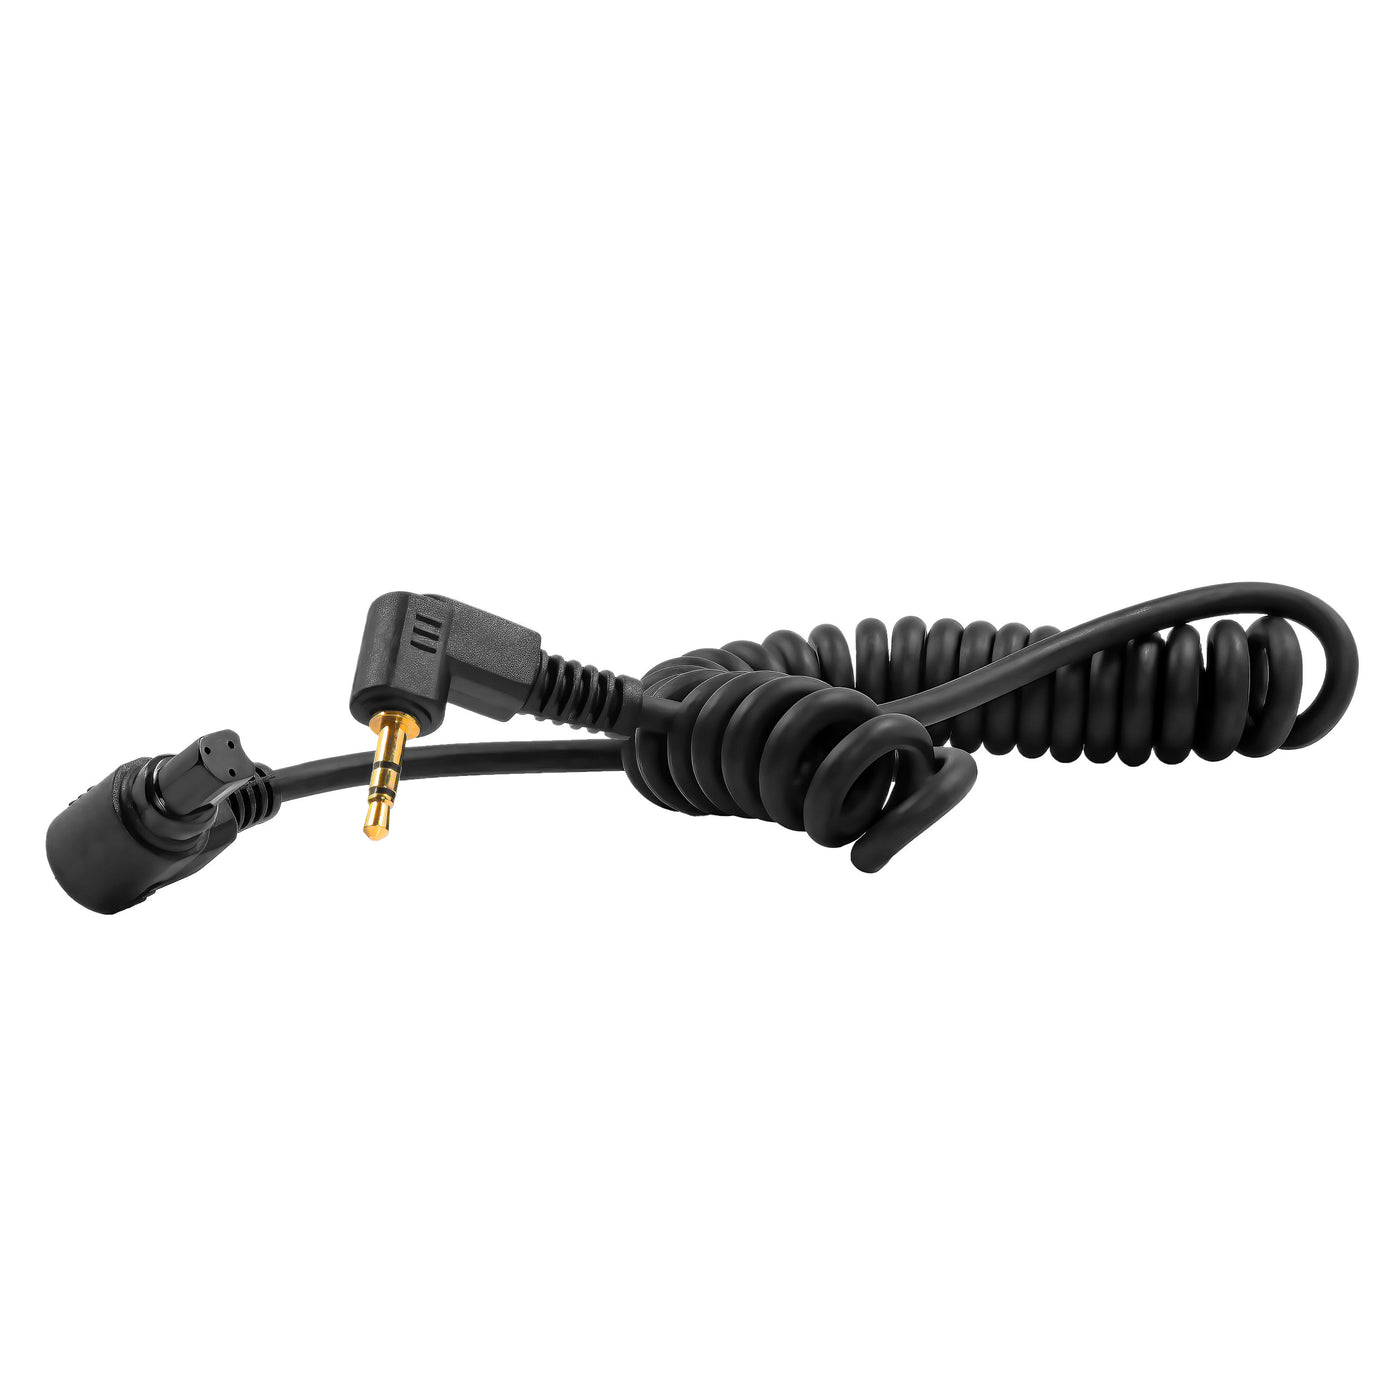 2.5mm to N3 Canon Remote Trigger Shutter Cable